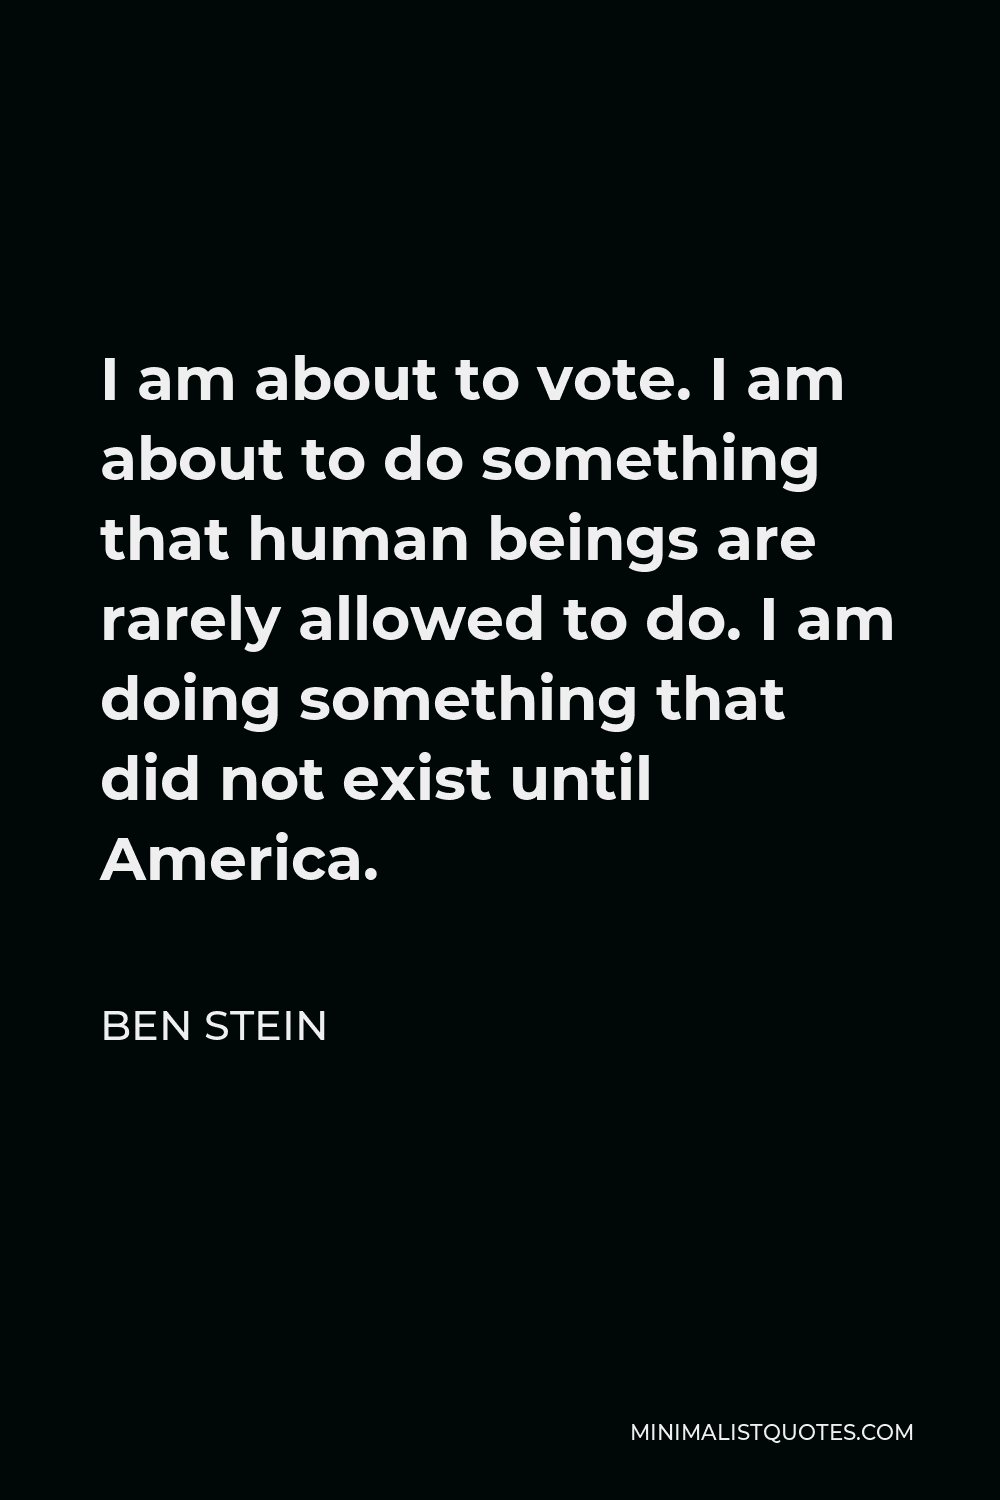 Ben Stein Quote - I am about to vote. I am about to do something that human beings are rarely allowed to do. I am doing something that did not exist until America.